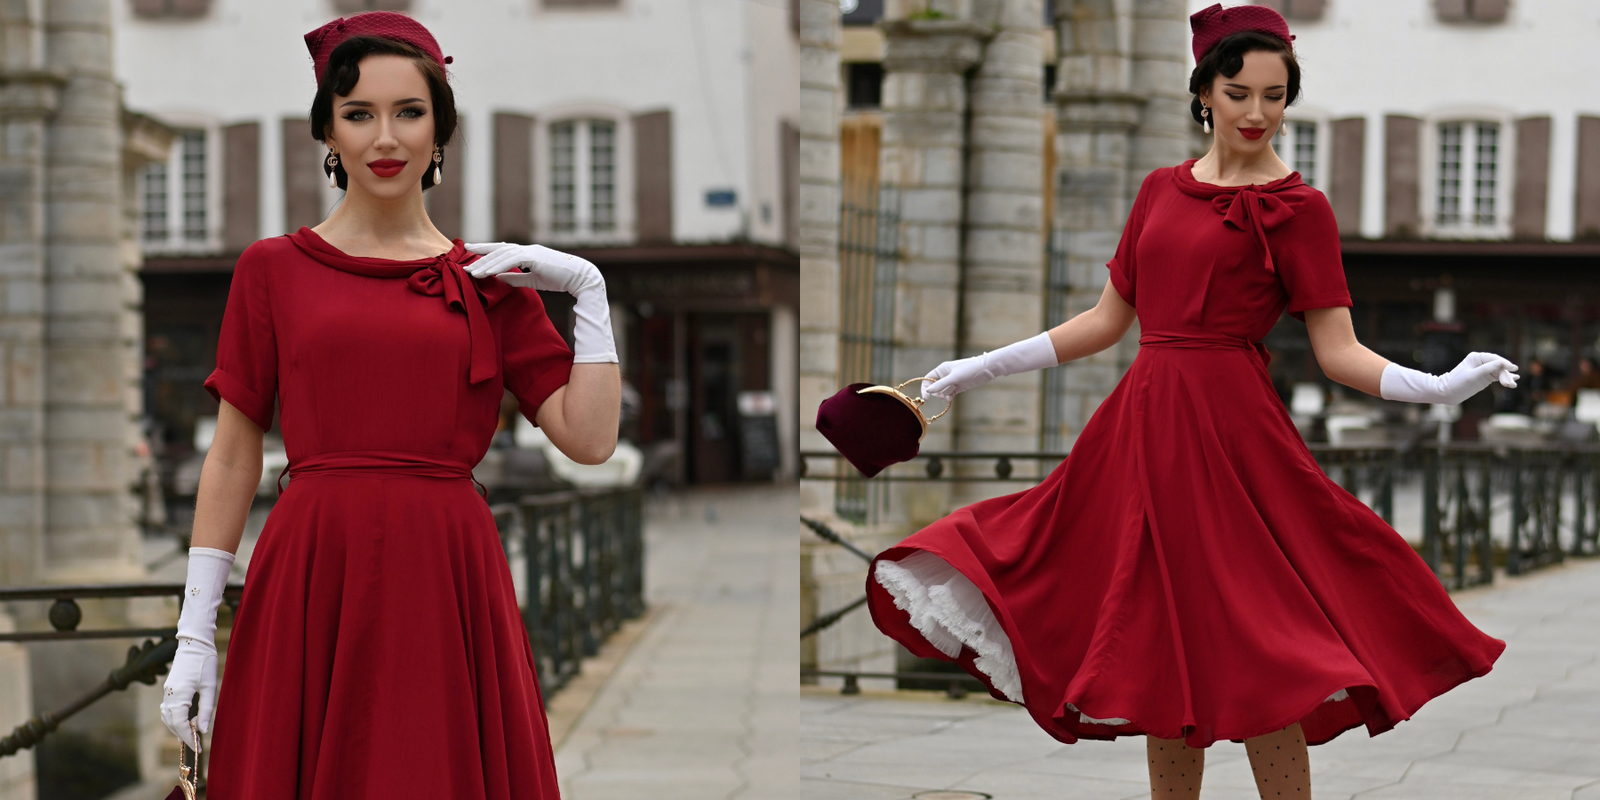 Making Vintage 1940s Clothes for Women